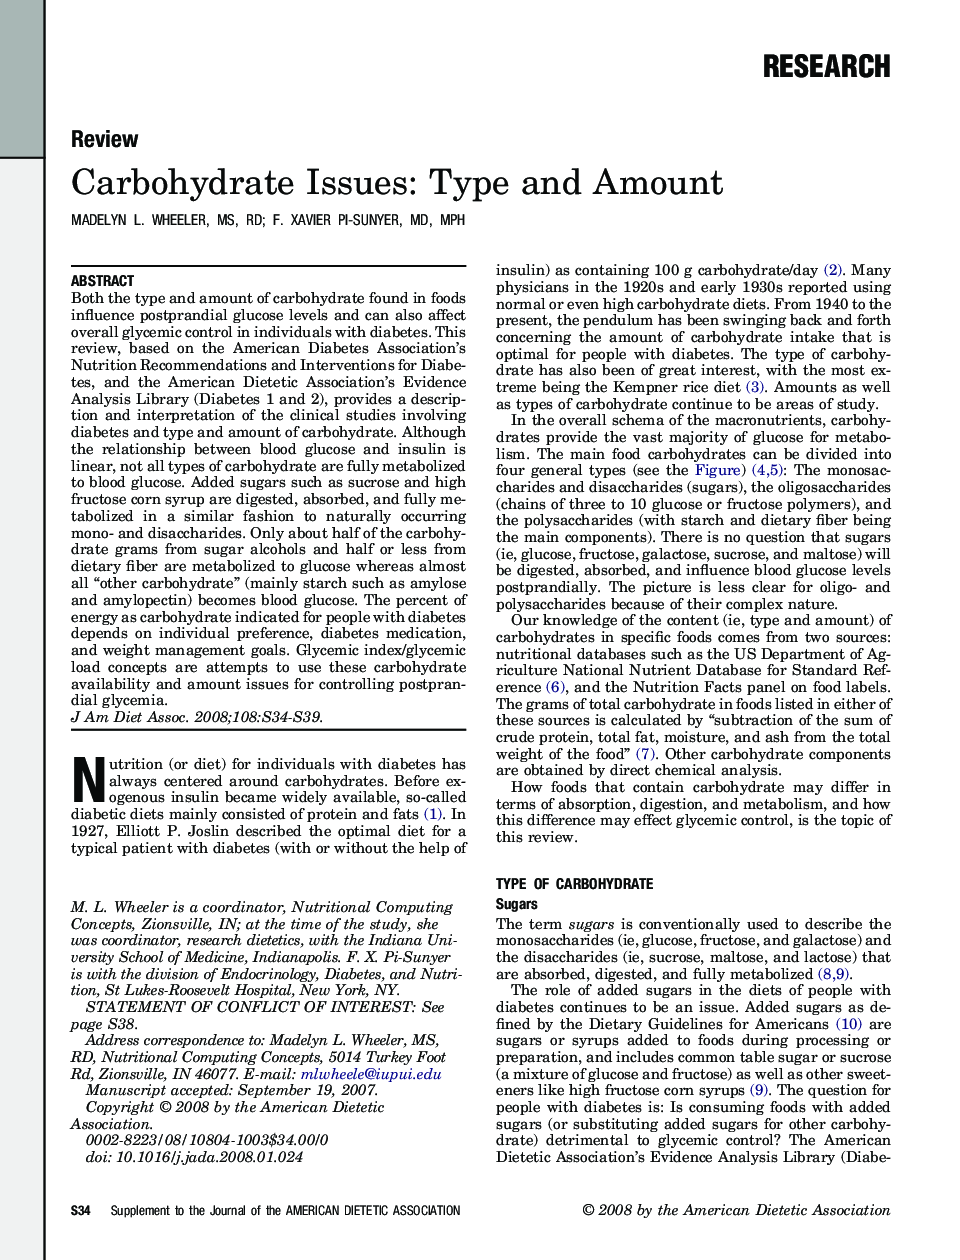 Carbohydrate Issues: Type and Amount 